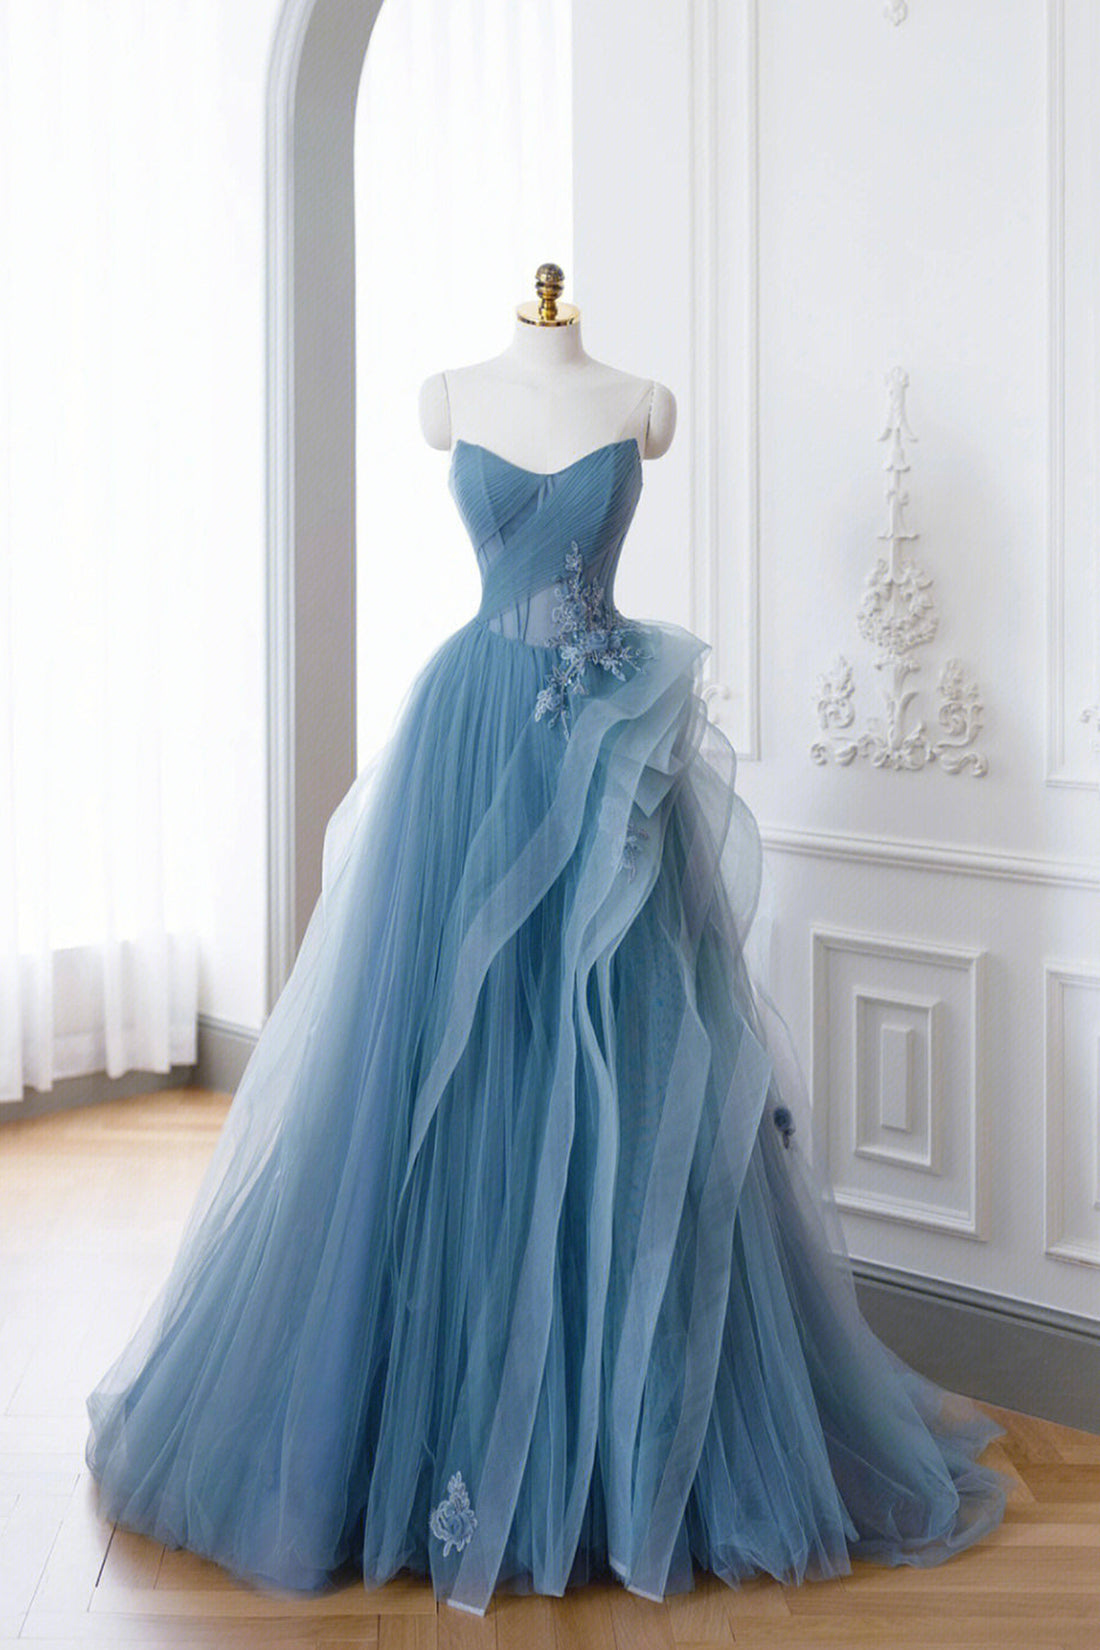 Prom Dress 2022, Dusty Blue Tulle Floor Length Prom Dresses, Blue Off the Shoulder Removable Sleeve Evening Dress